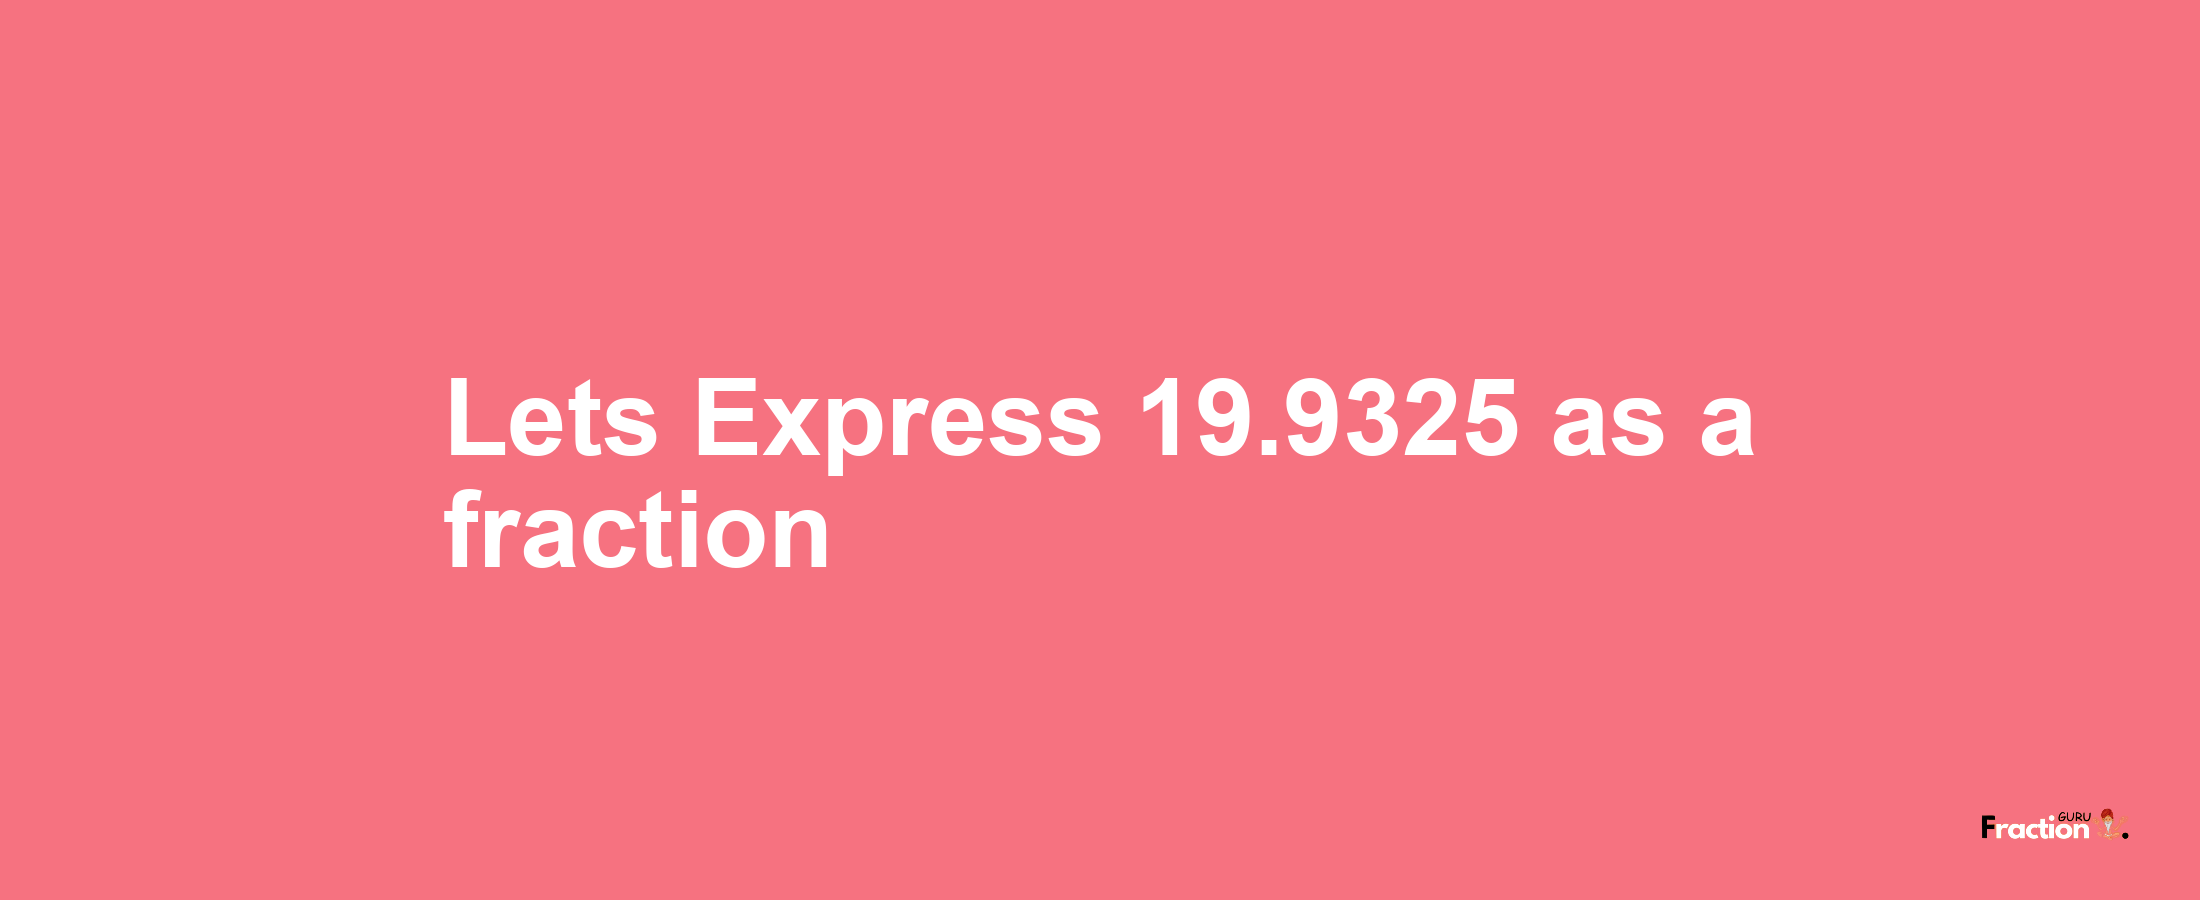 Lets Express 19.9325 as afraction